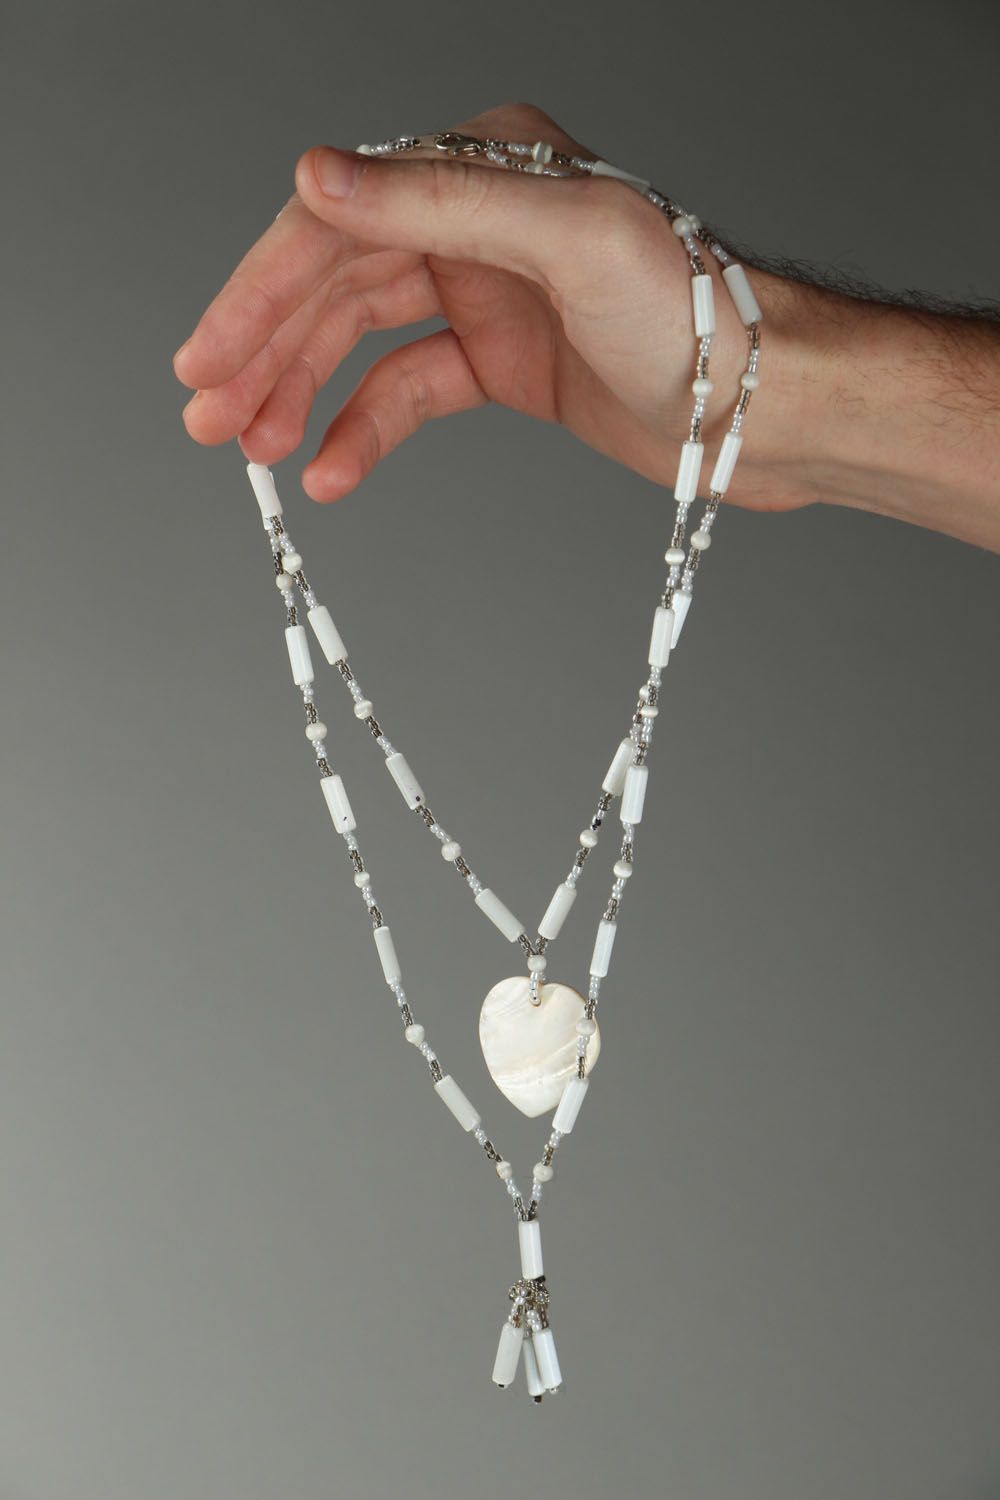 Necklace with white cat's eye stone photo 4